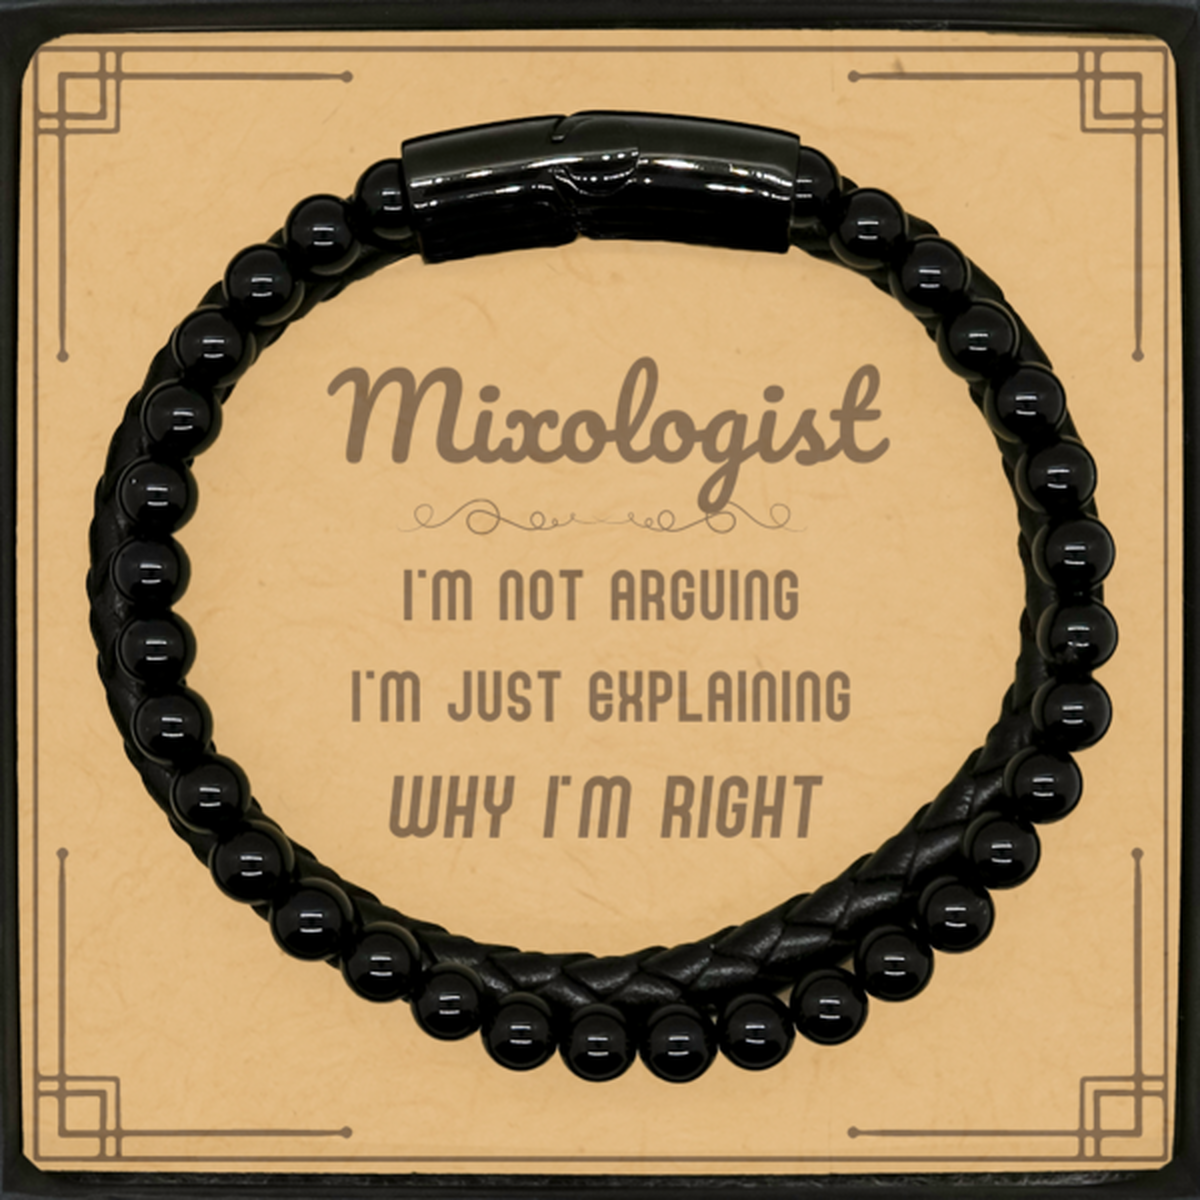 Mixologist I'm not Arguing. I'm Just Explaining Why I'm RIGHT Stone Leather Bracelets, Funny Saying Quote Mixologist Gifts For Mixologist Message Card Graduation Birthday Christmas Gifts for Men Women Coworker